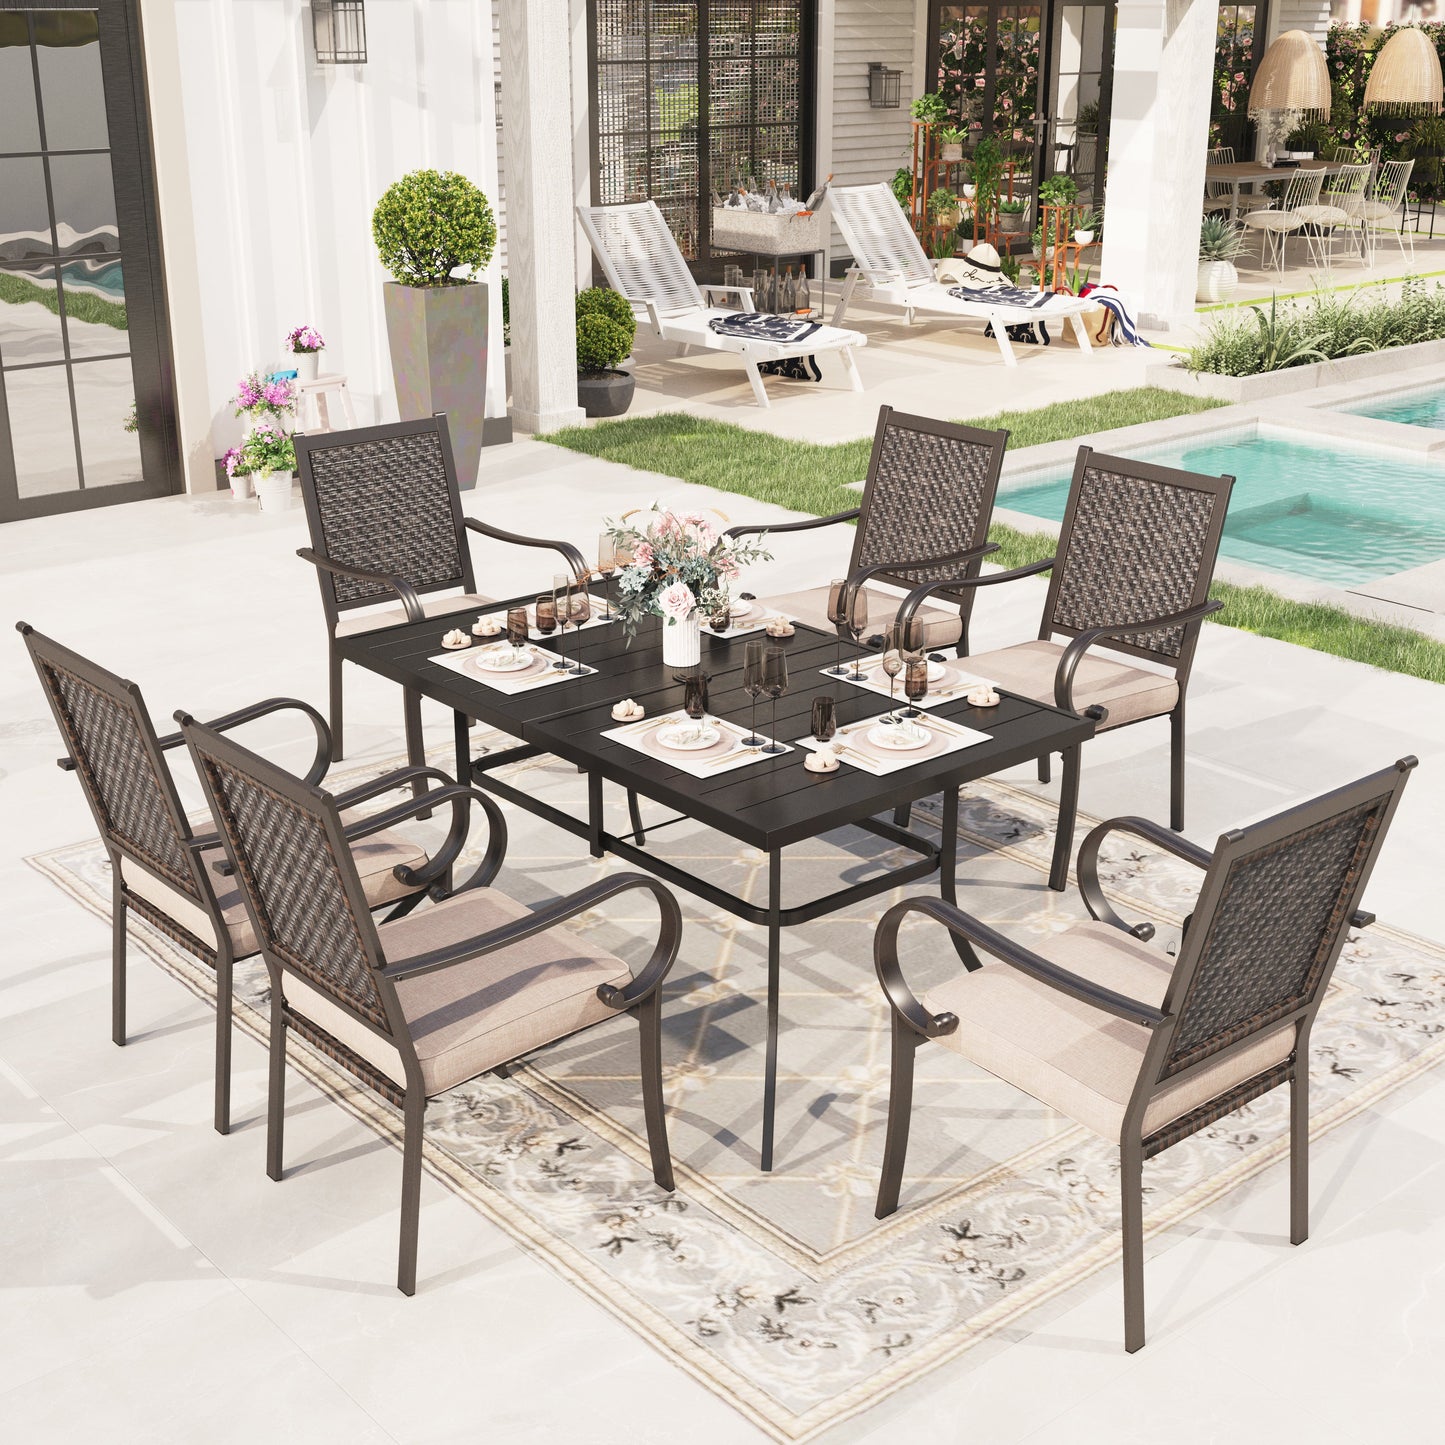 Sophia & William 7 Pieces Outdoor Patio Dining Set Wicker Rattan Chairs and Rectangular Steel Table for 6 person